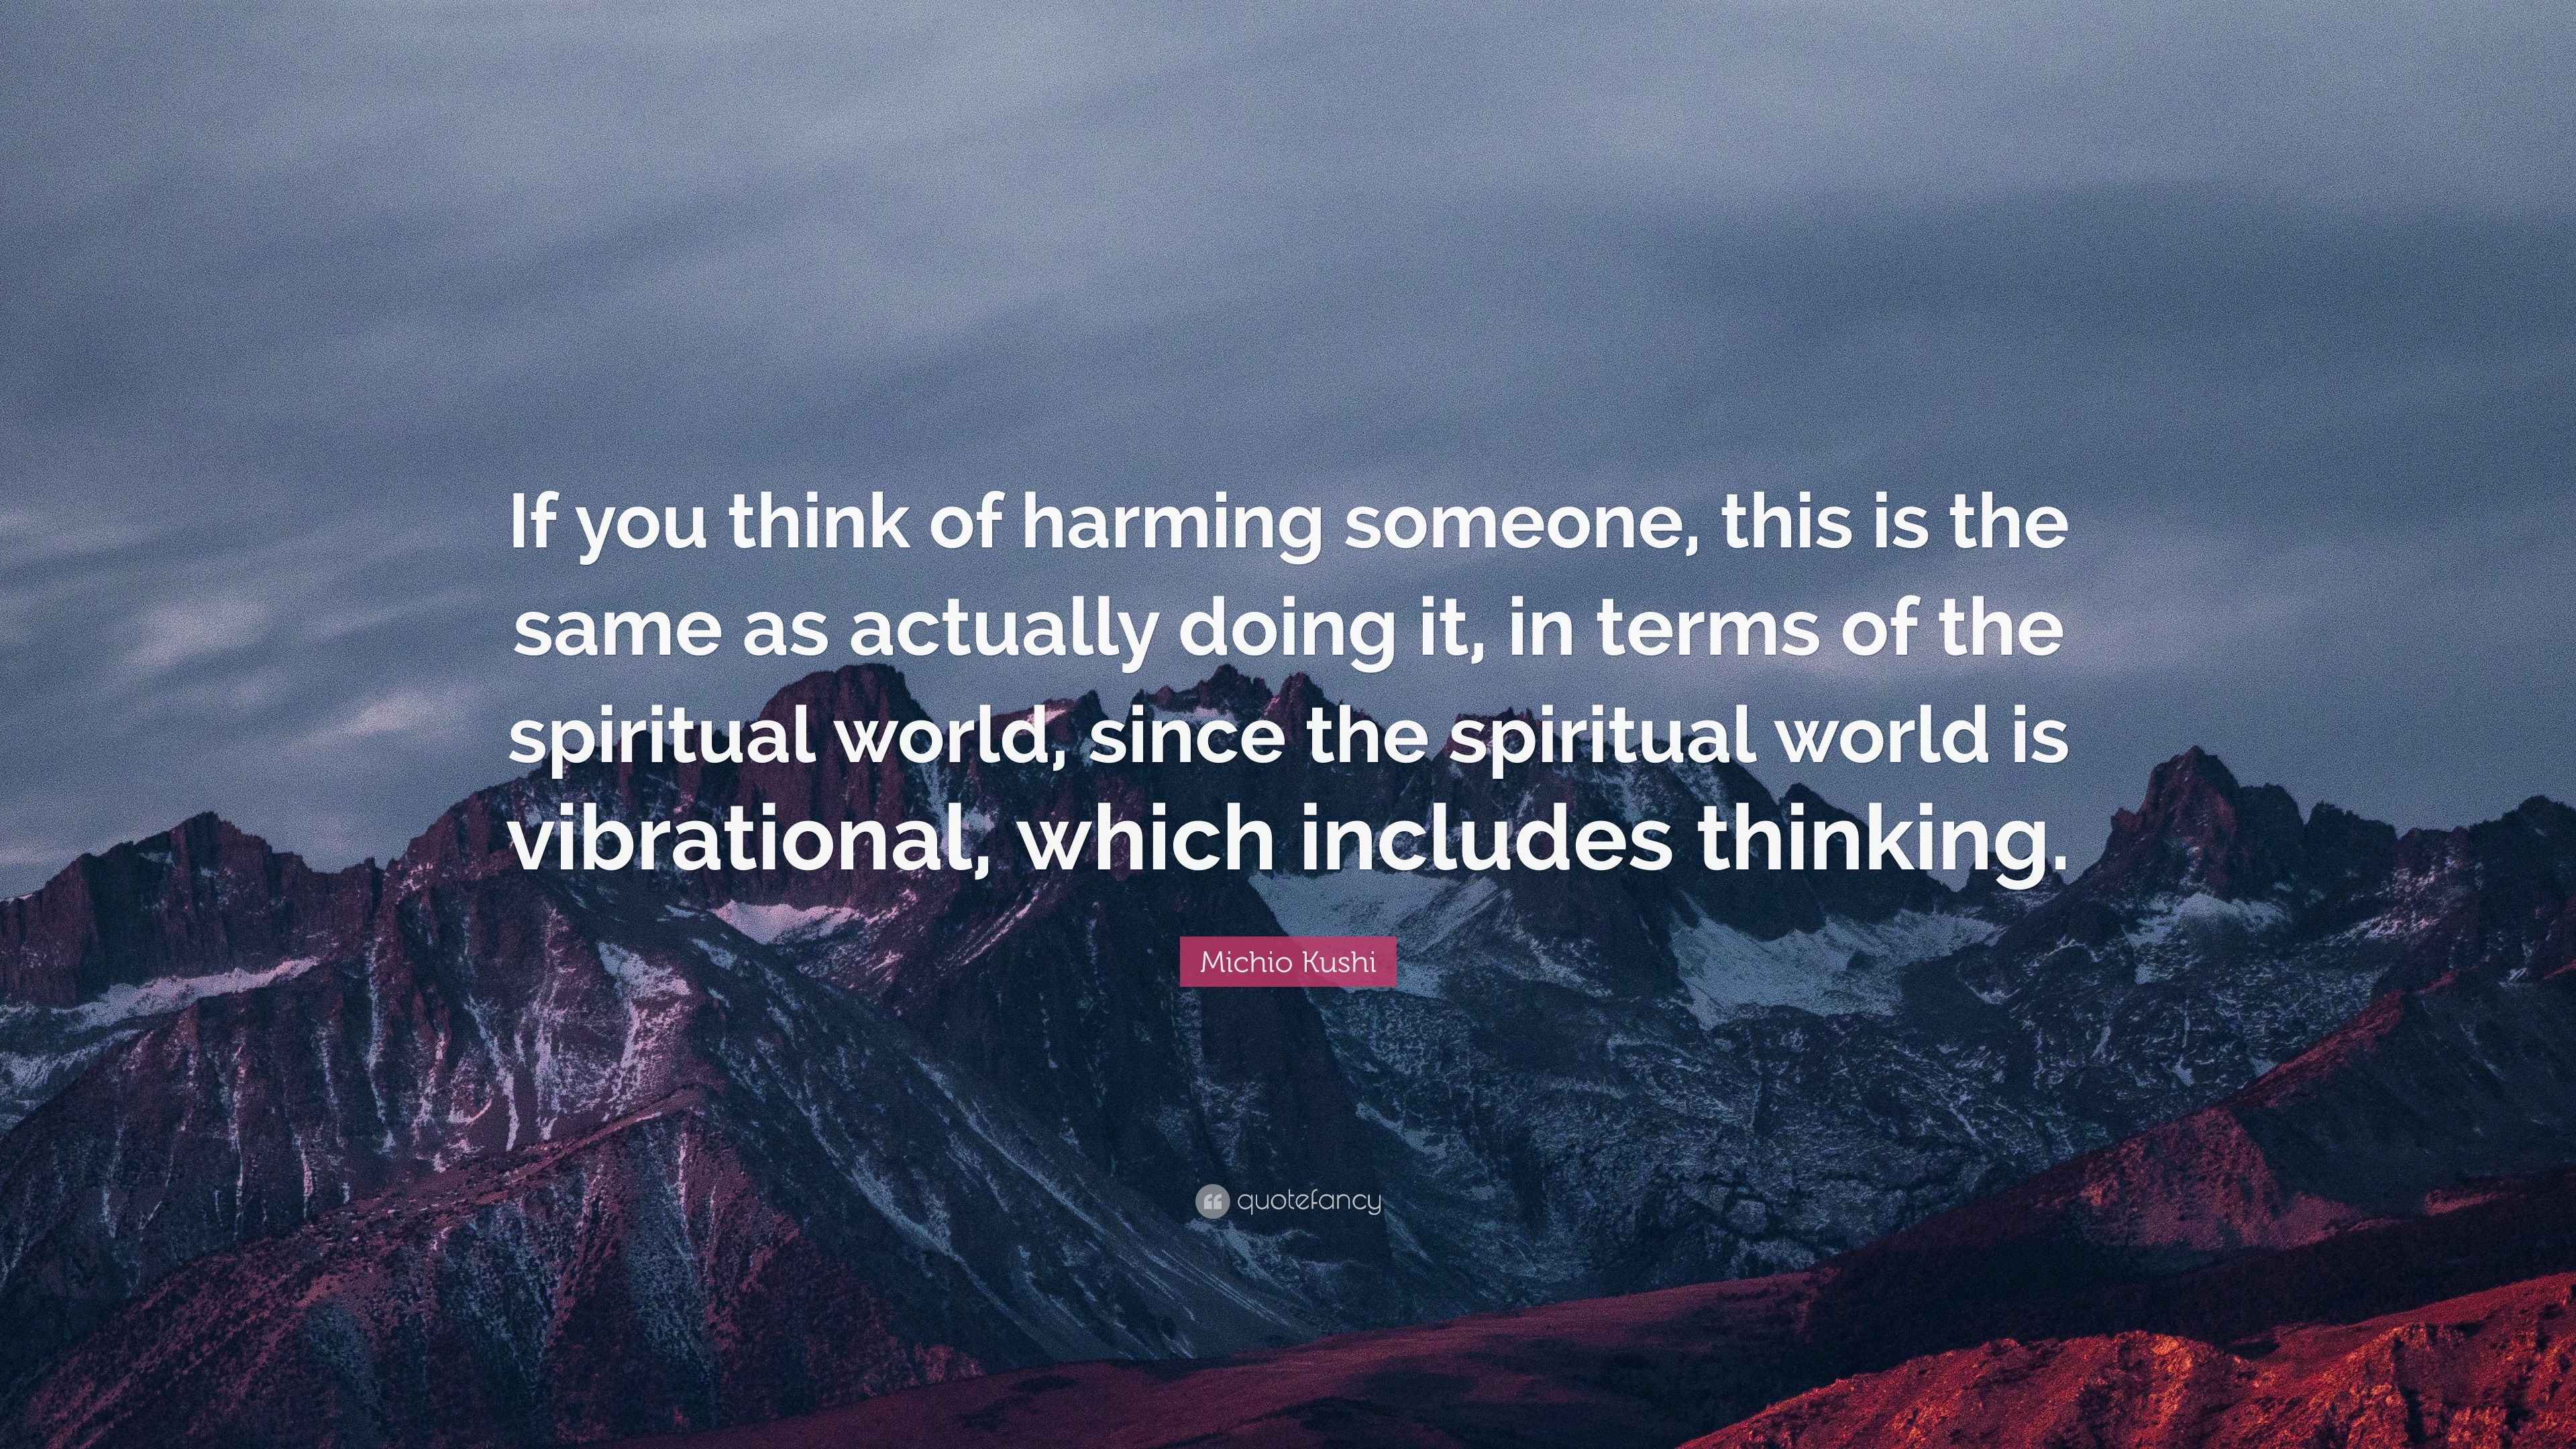 Michio Kushi Quote: “If you think of harming someone, this is